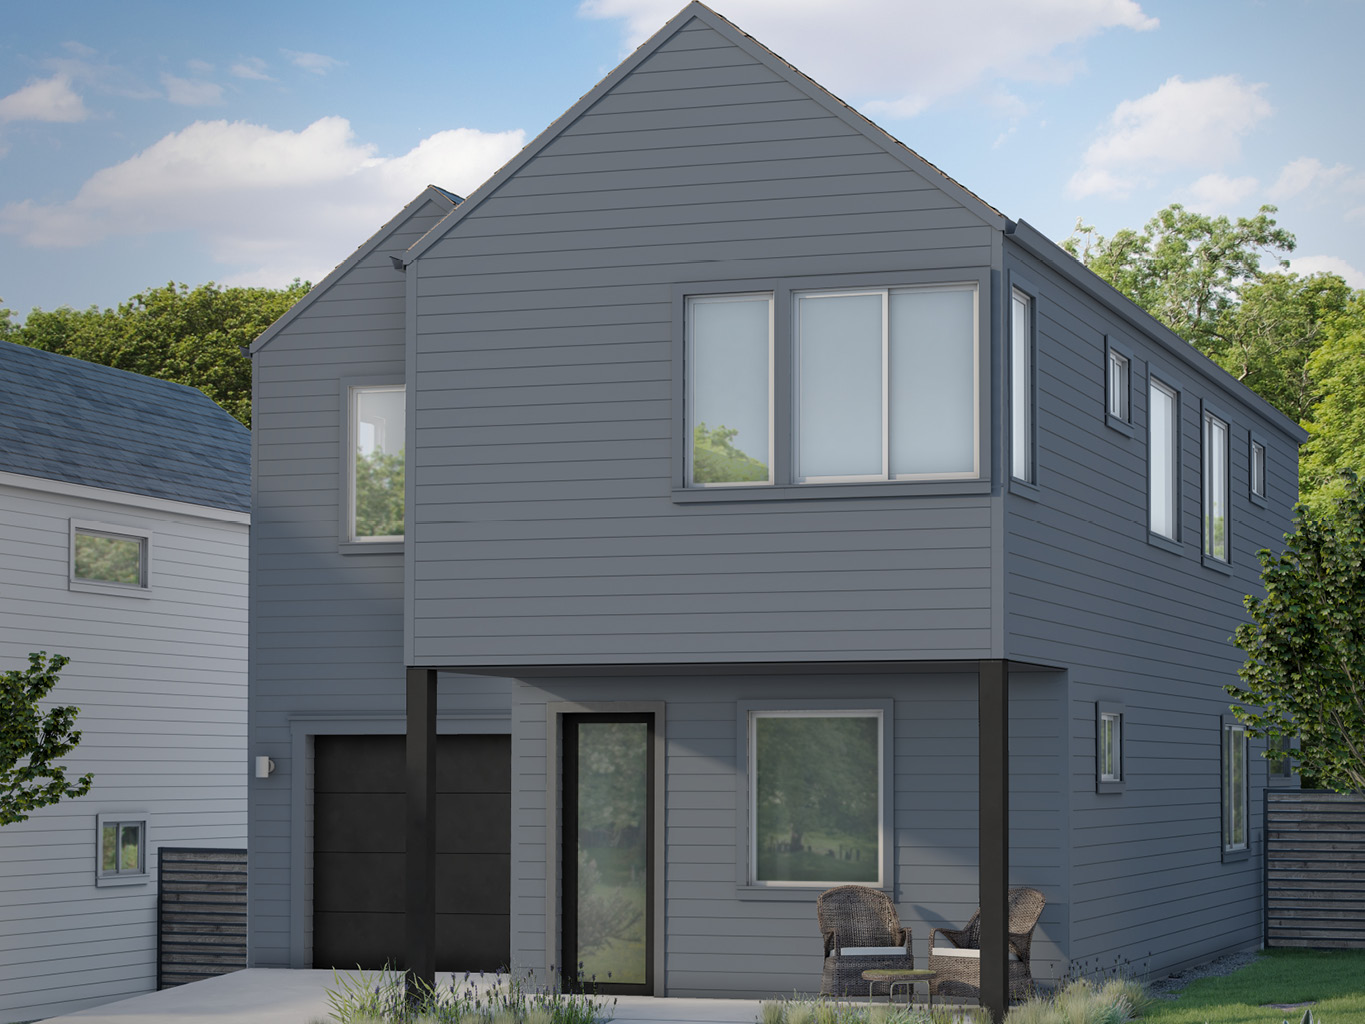 Lucy - Plan E - Exterior Rendering